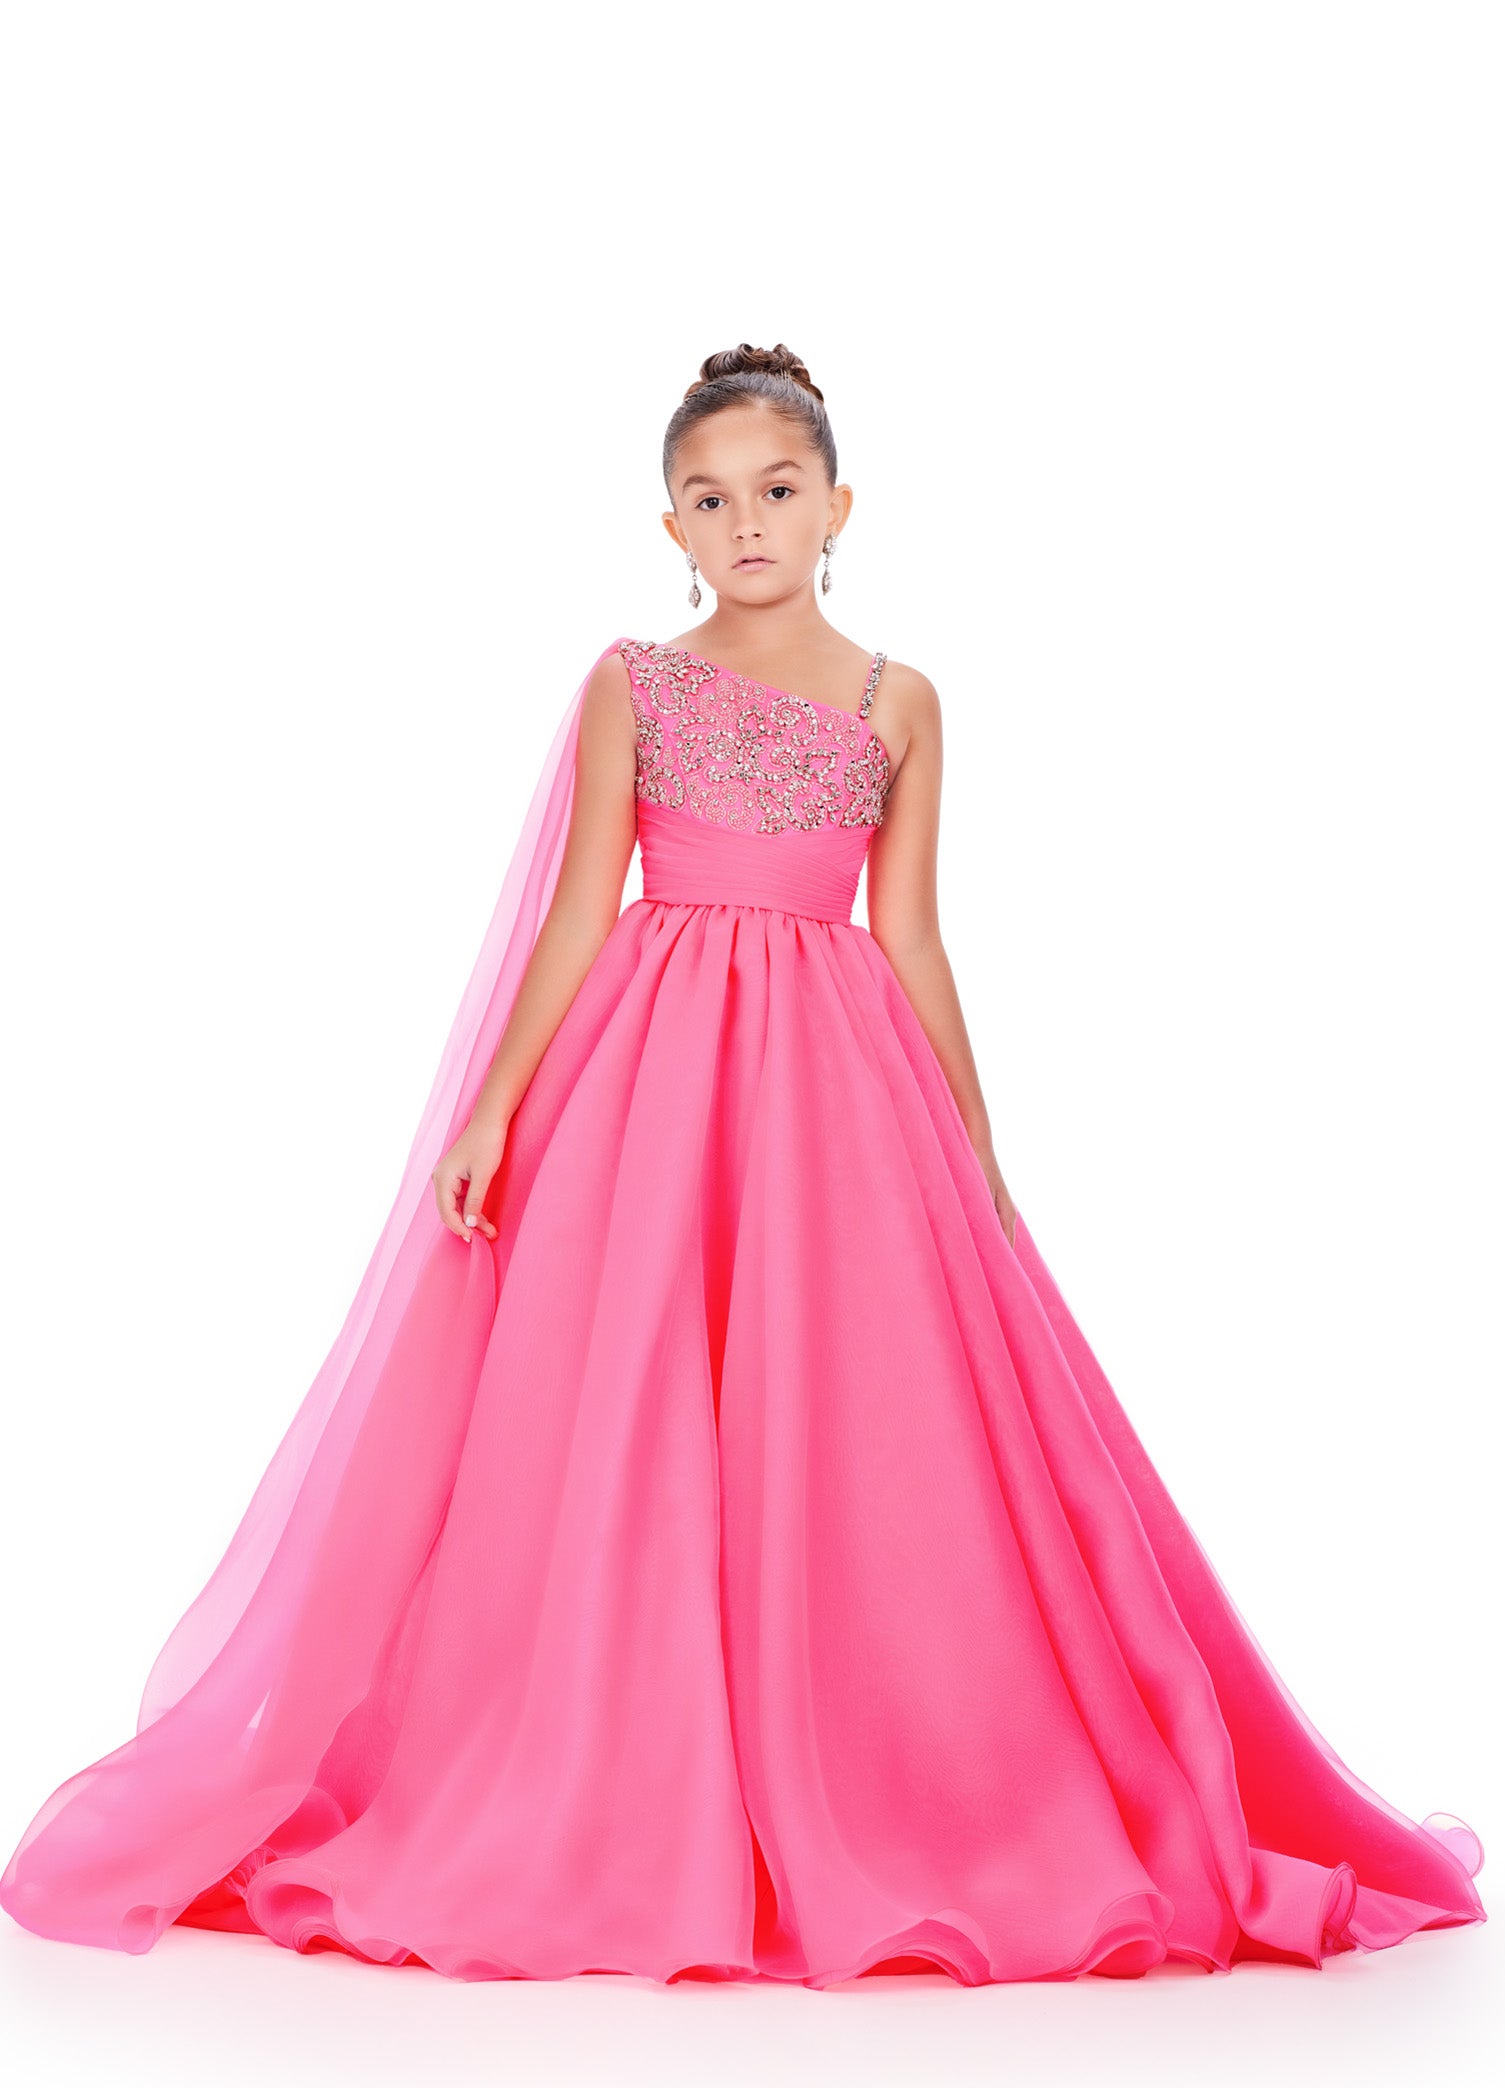 Herrnalise Toddler Kids Baby Girls Floral Lace Ball Gown Princess Dress  Party Dress Clothes - Walmart.com